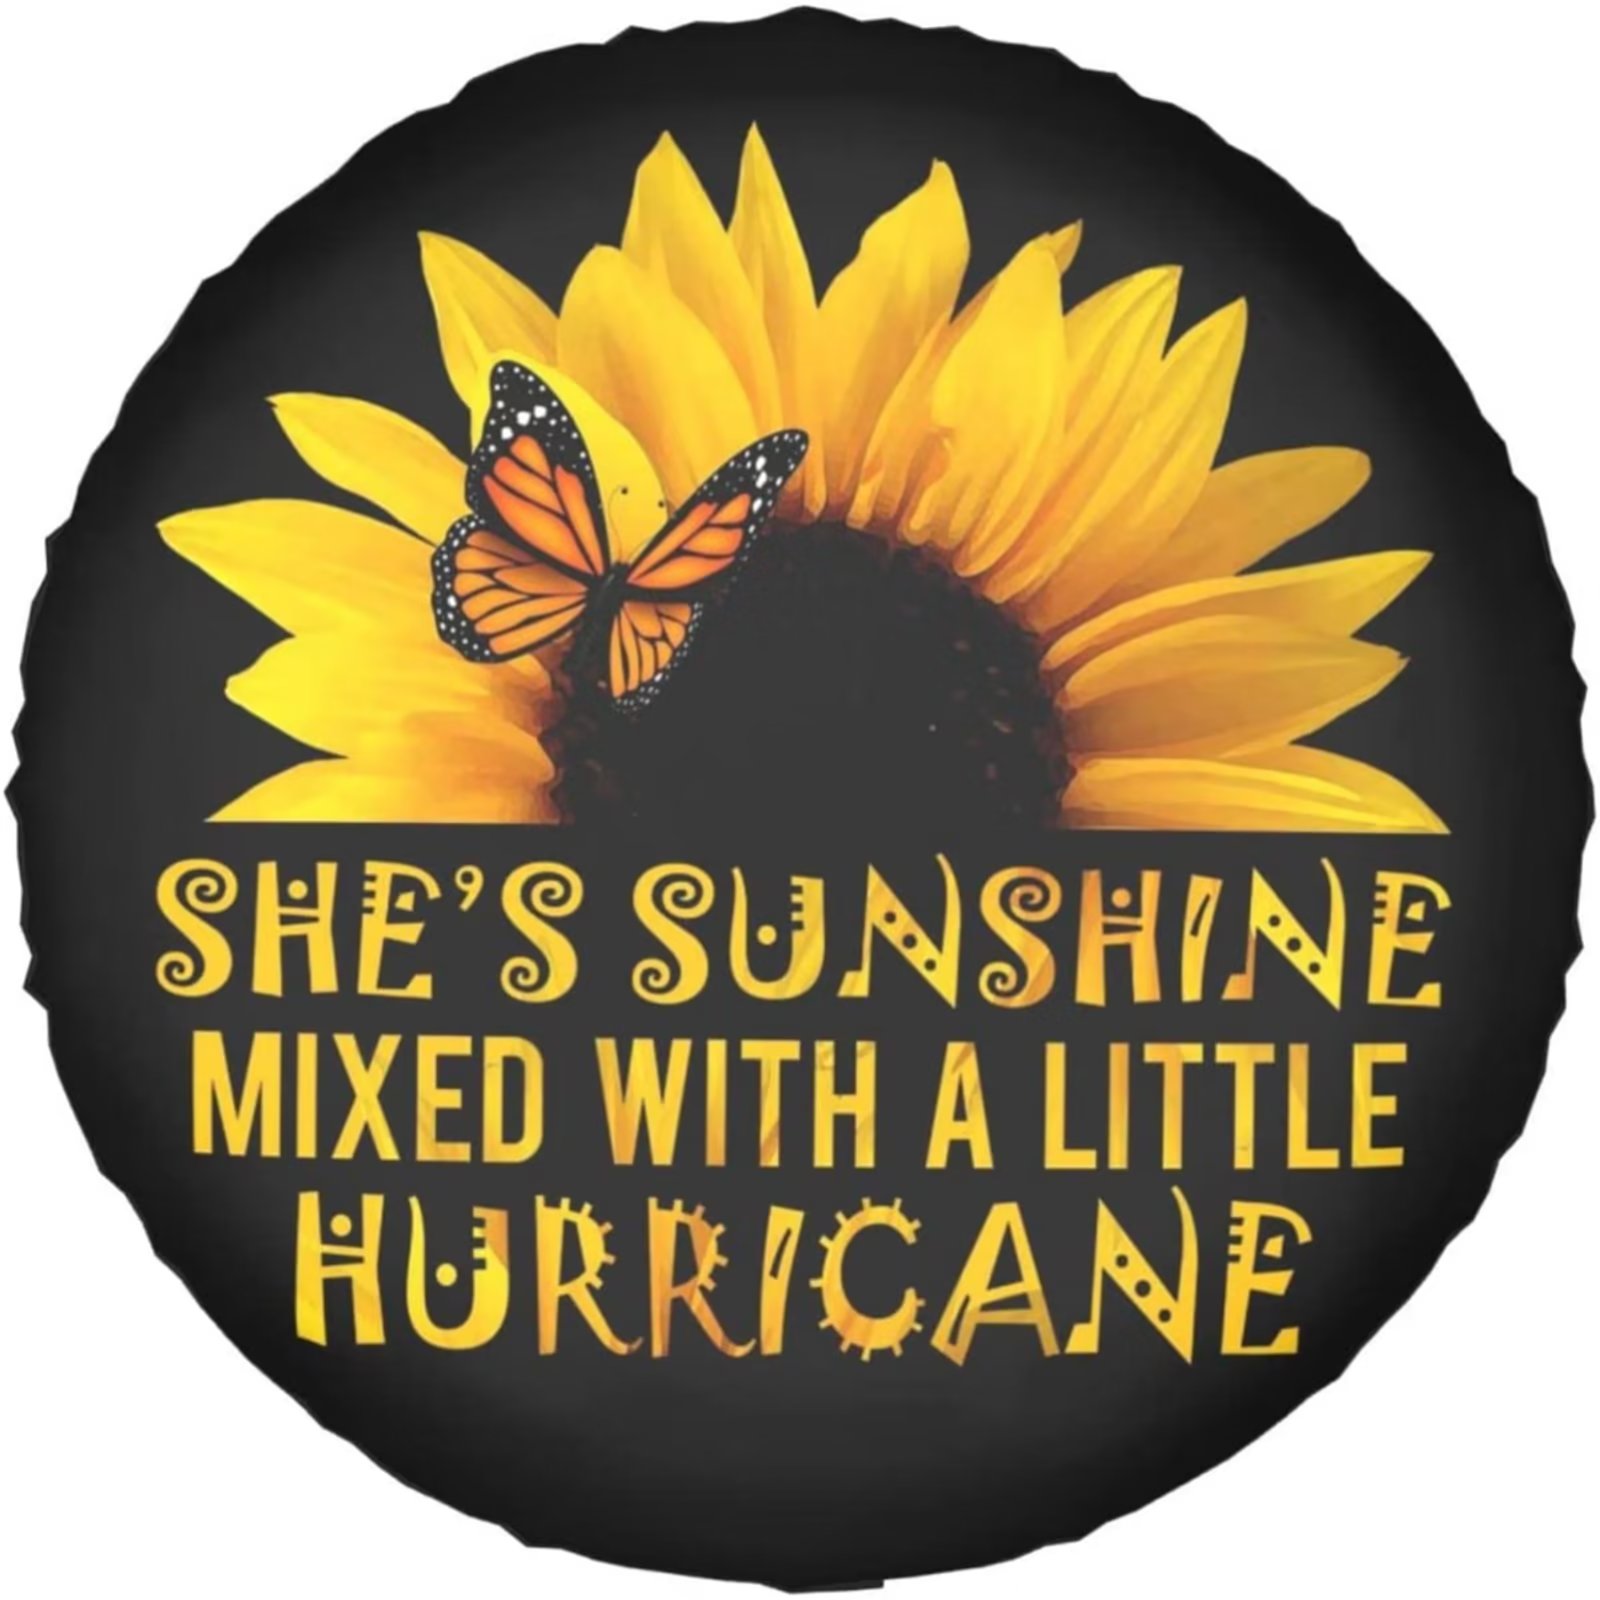 Butterfly and Sunflower She is Sunshine Spare Tire Cover Universal Fit for  Jeep Wrangler Rv SUV Truck Travel Trailer and Many Vehicles 14